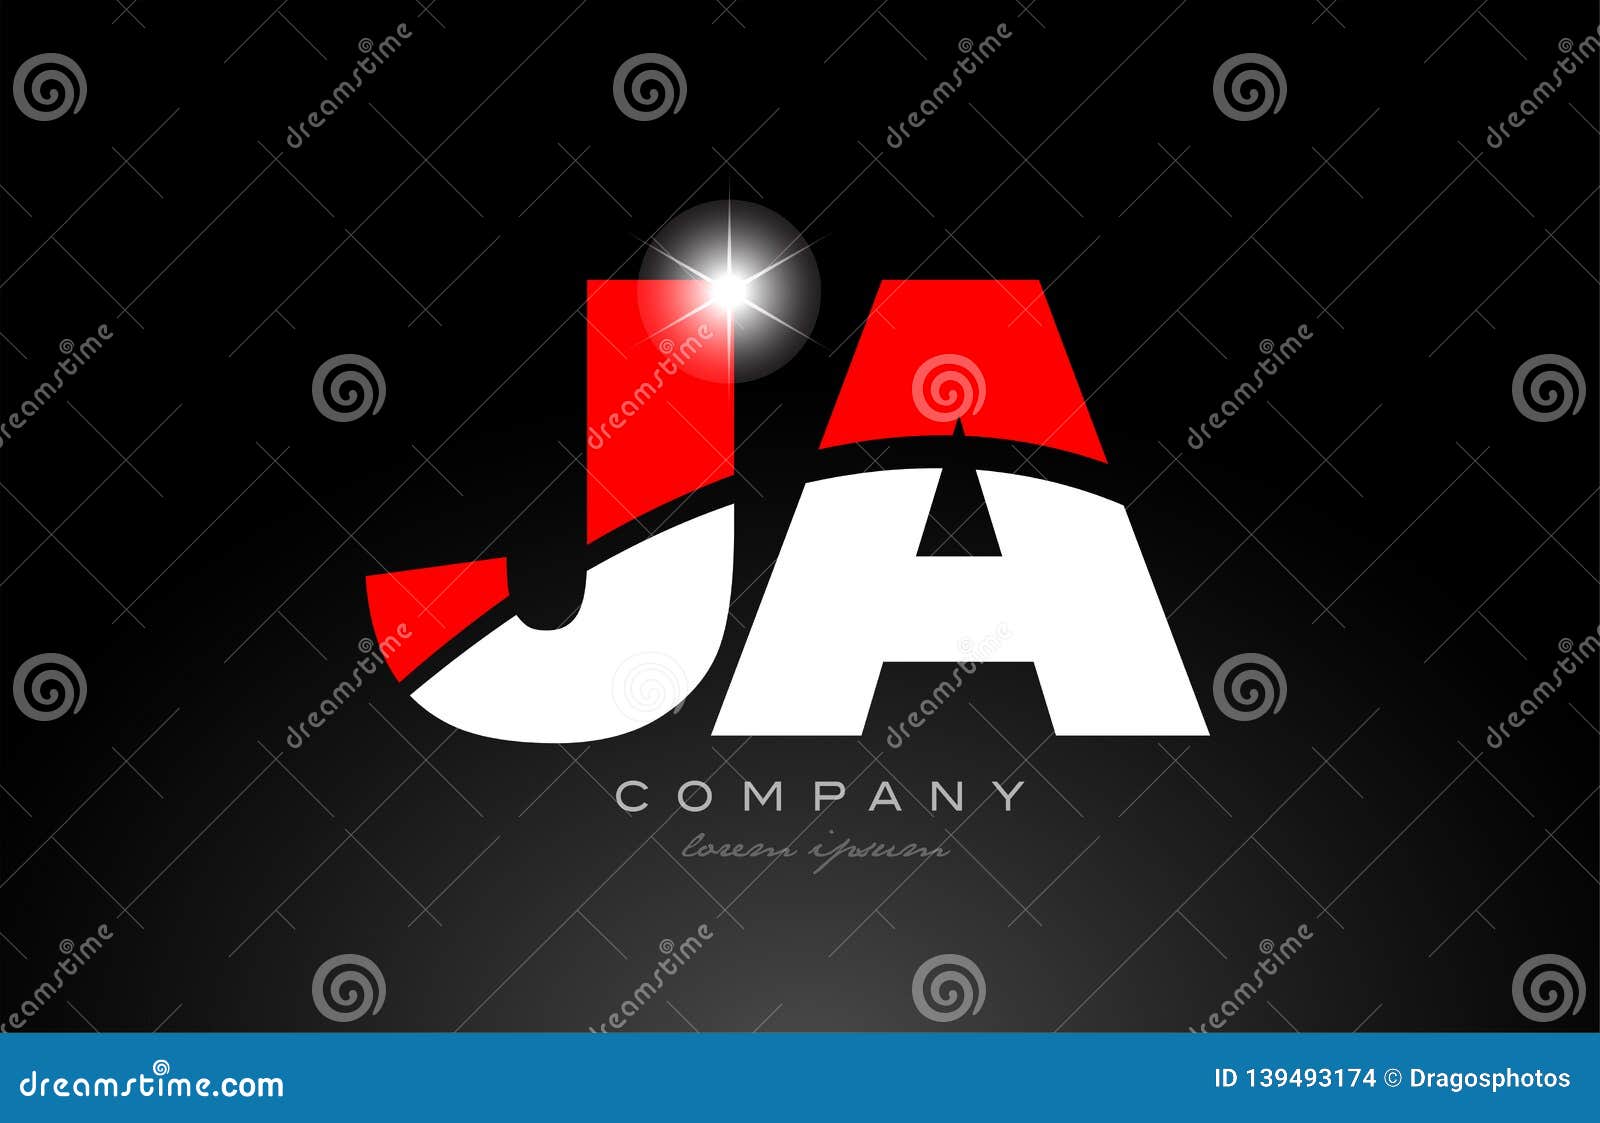 red white color letter combination ja j a alphabet for logo icon 